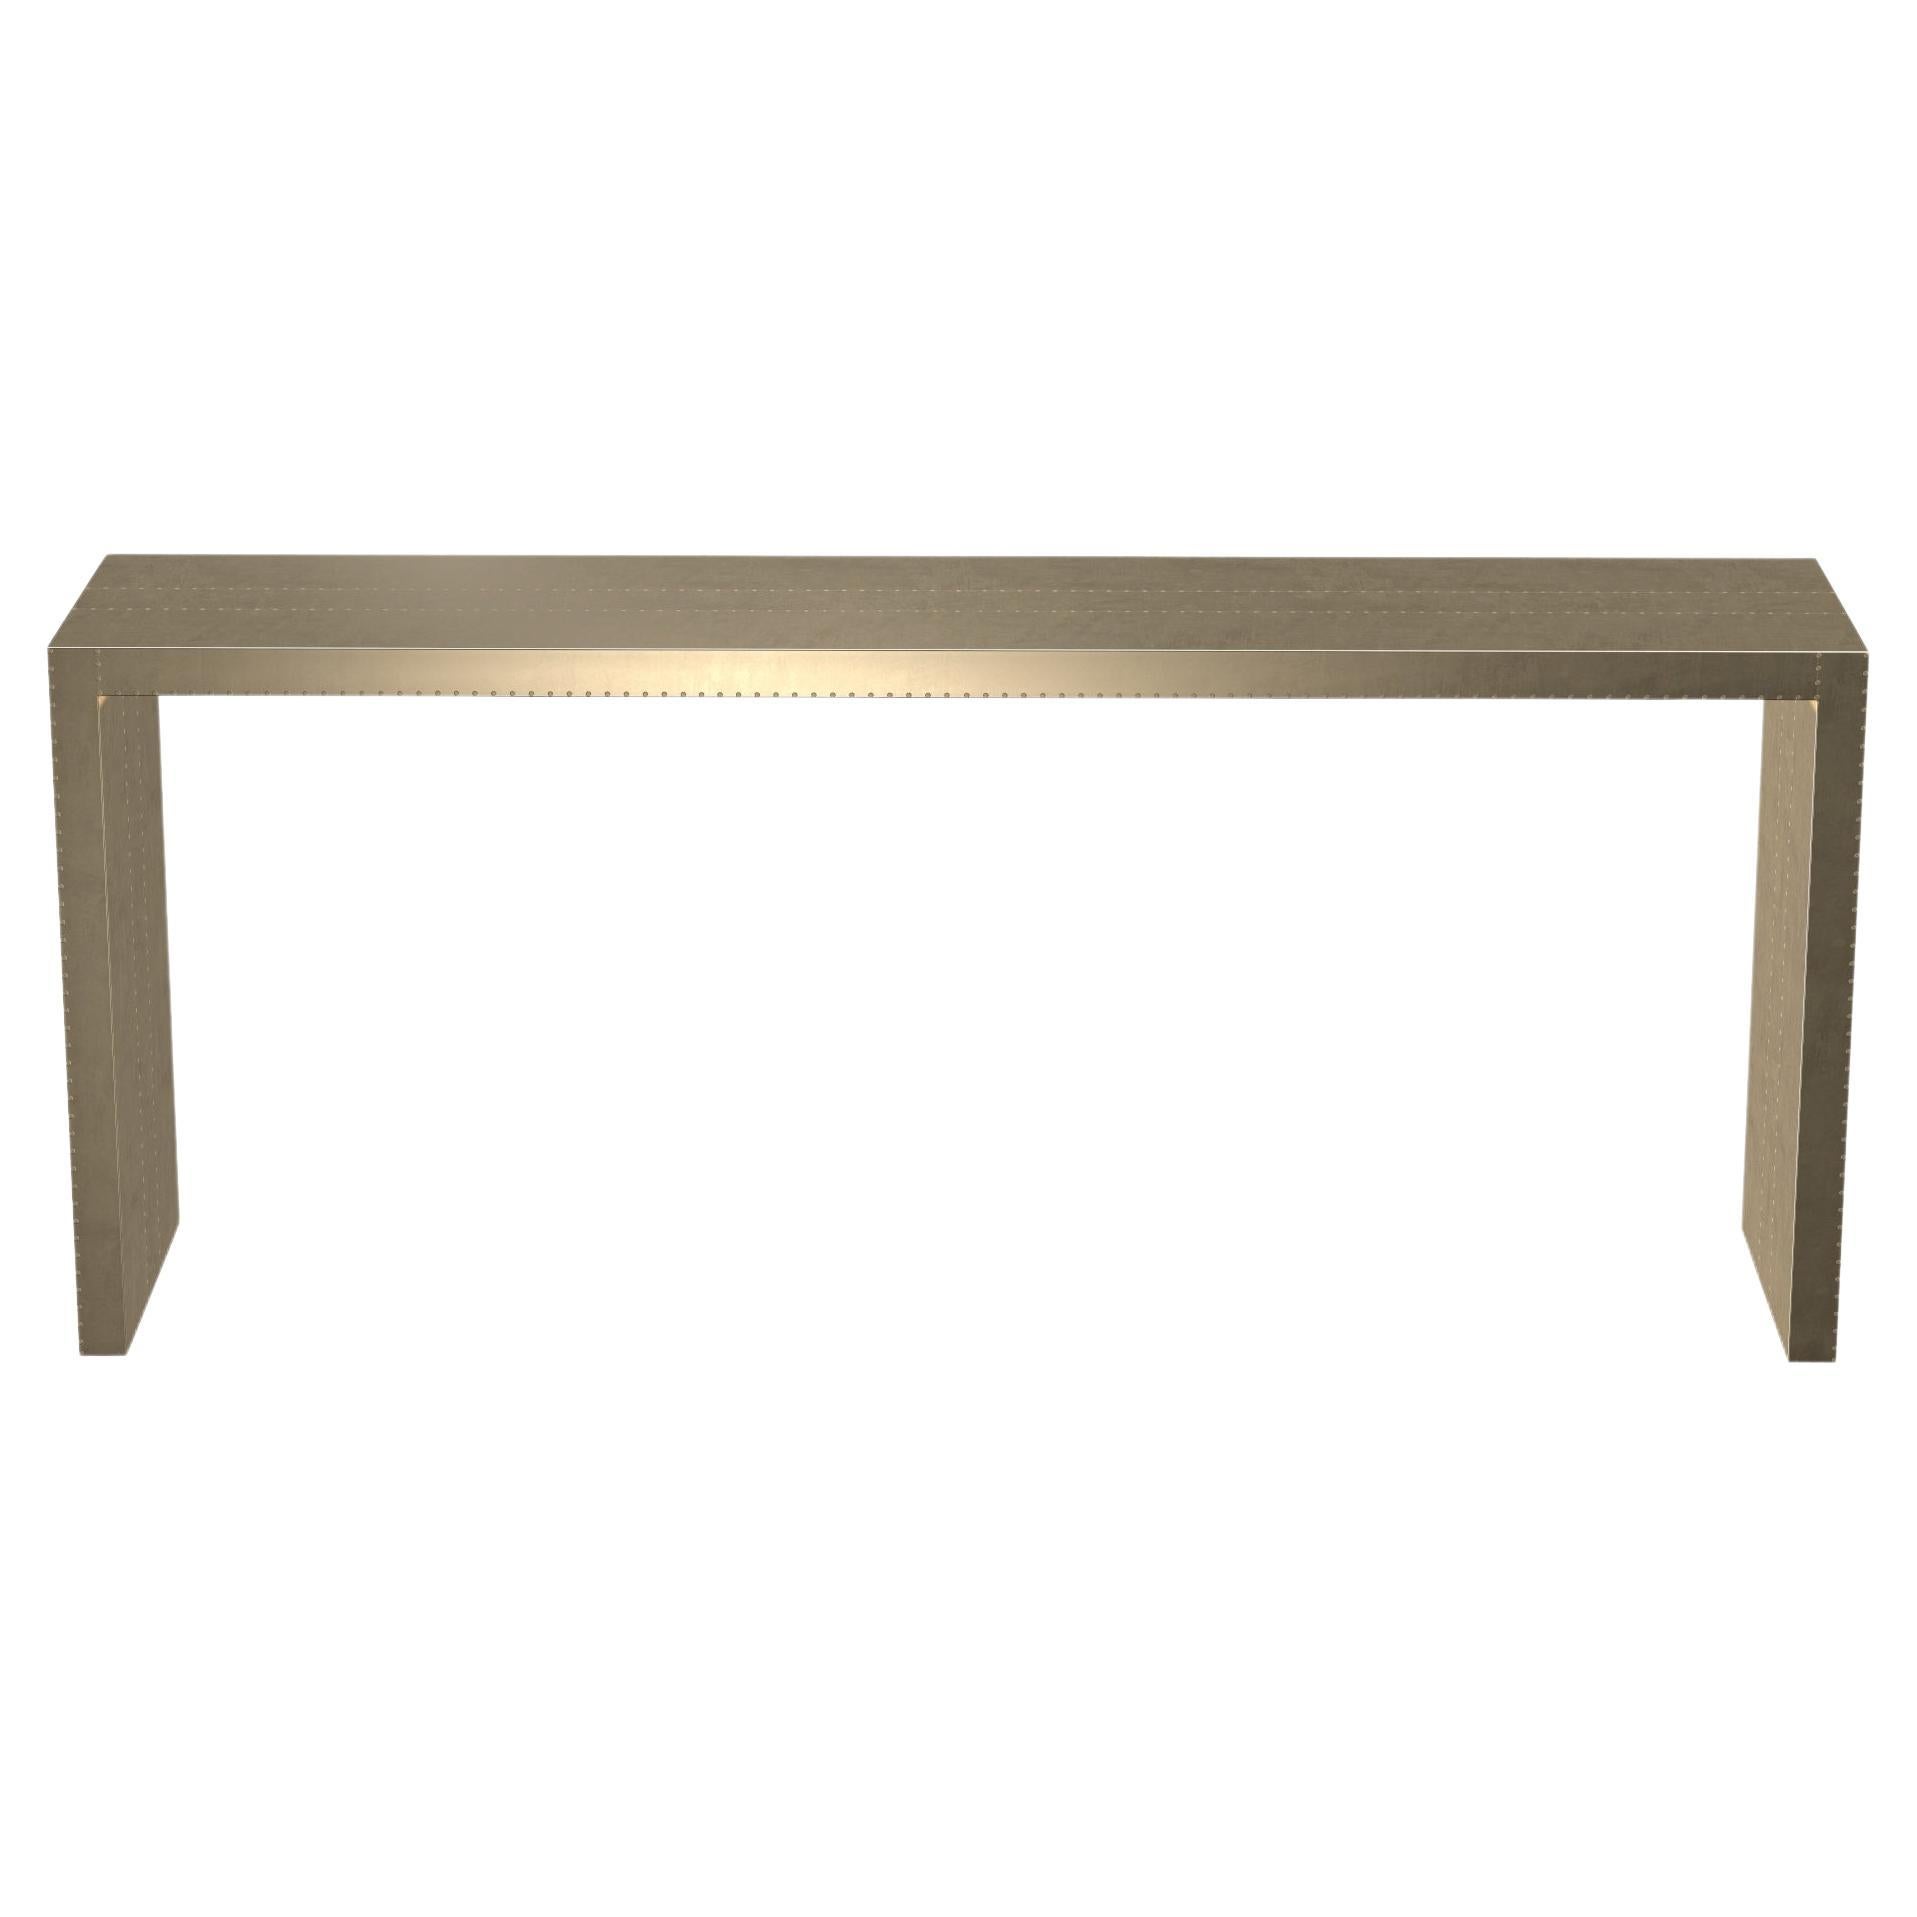 Art Deco Conference Tables Rectangular Console in Smooth Brass by Alison Spear